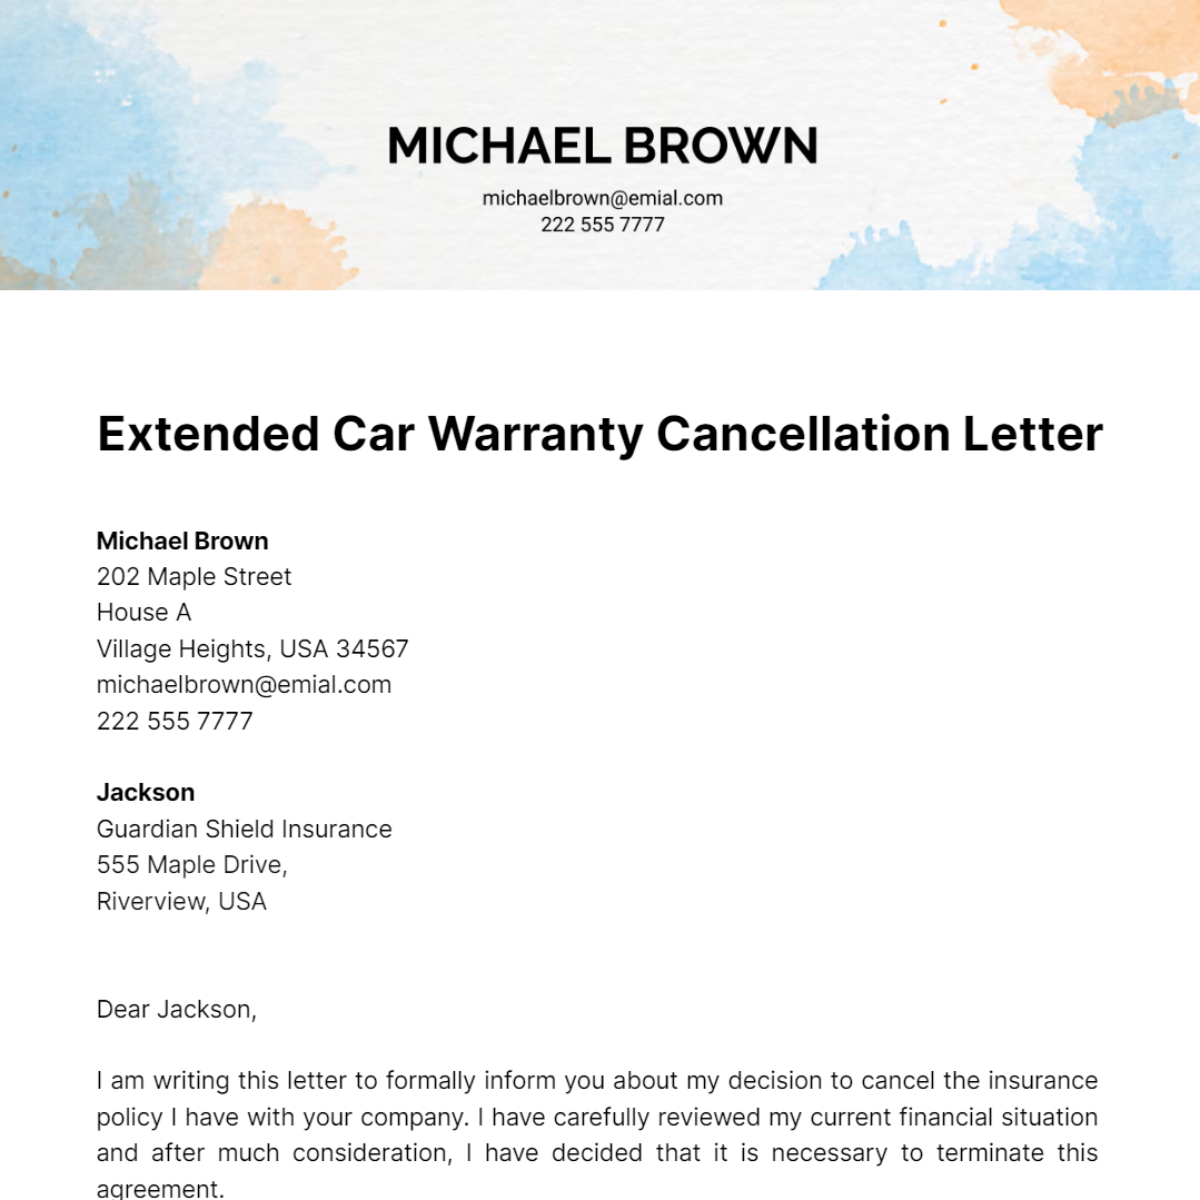 Extended Car Warranty Cancellation Letter Template